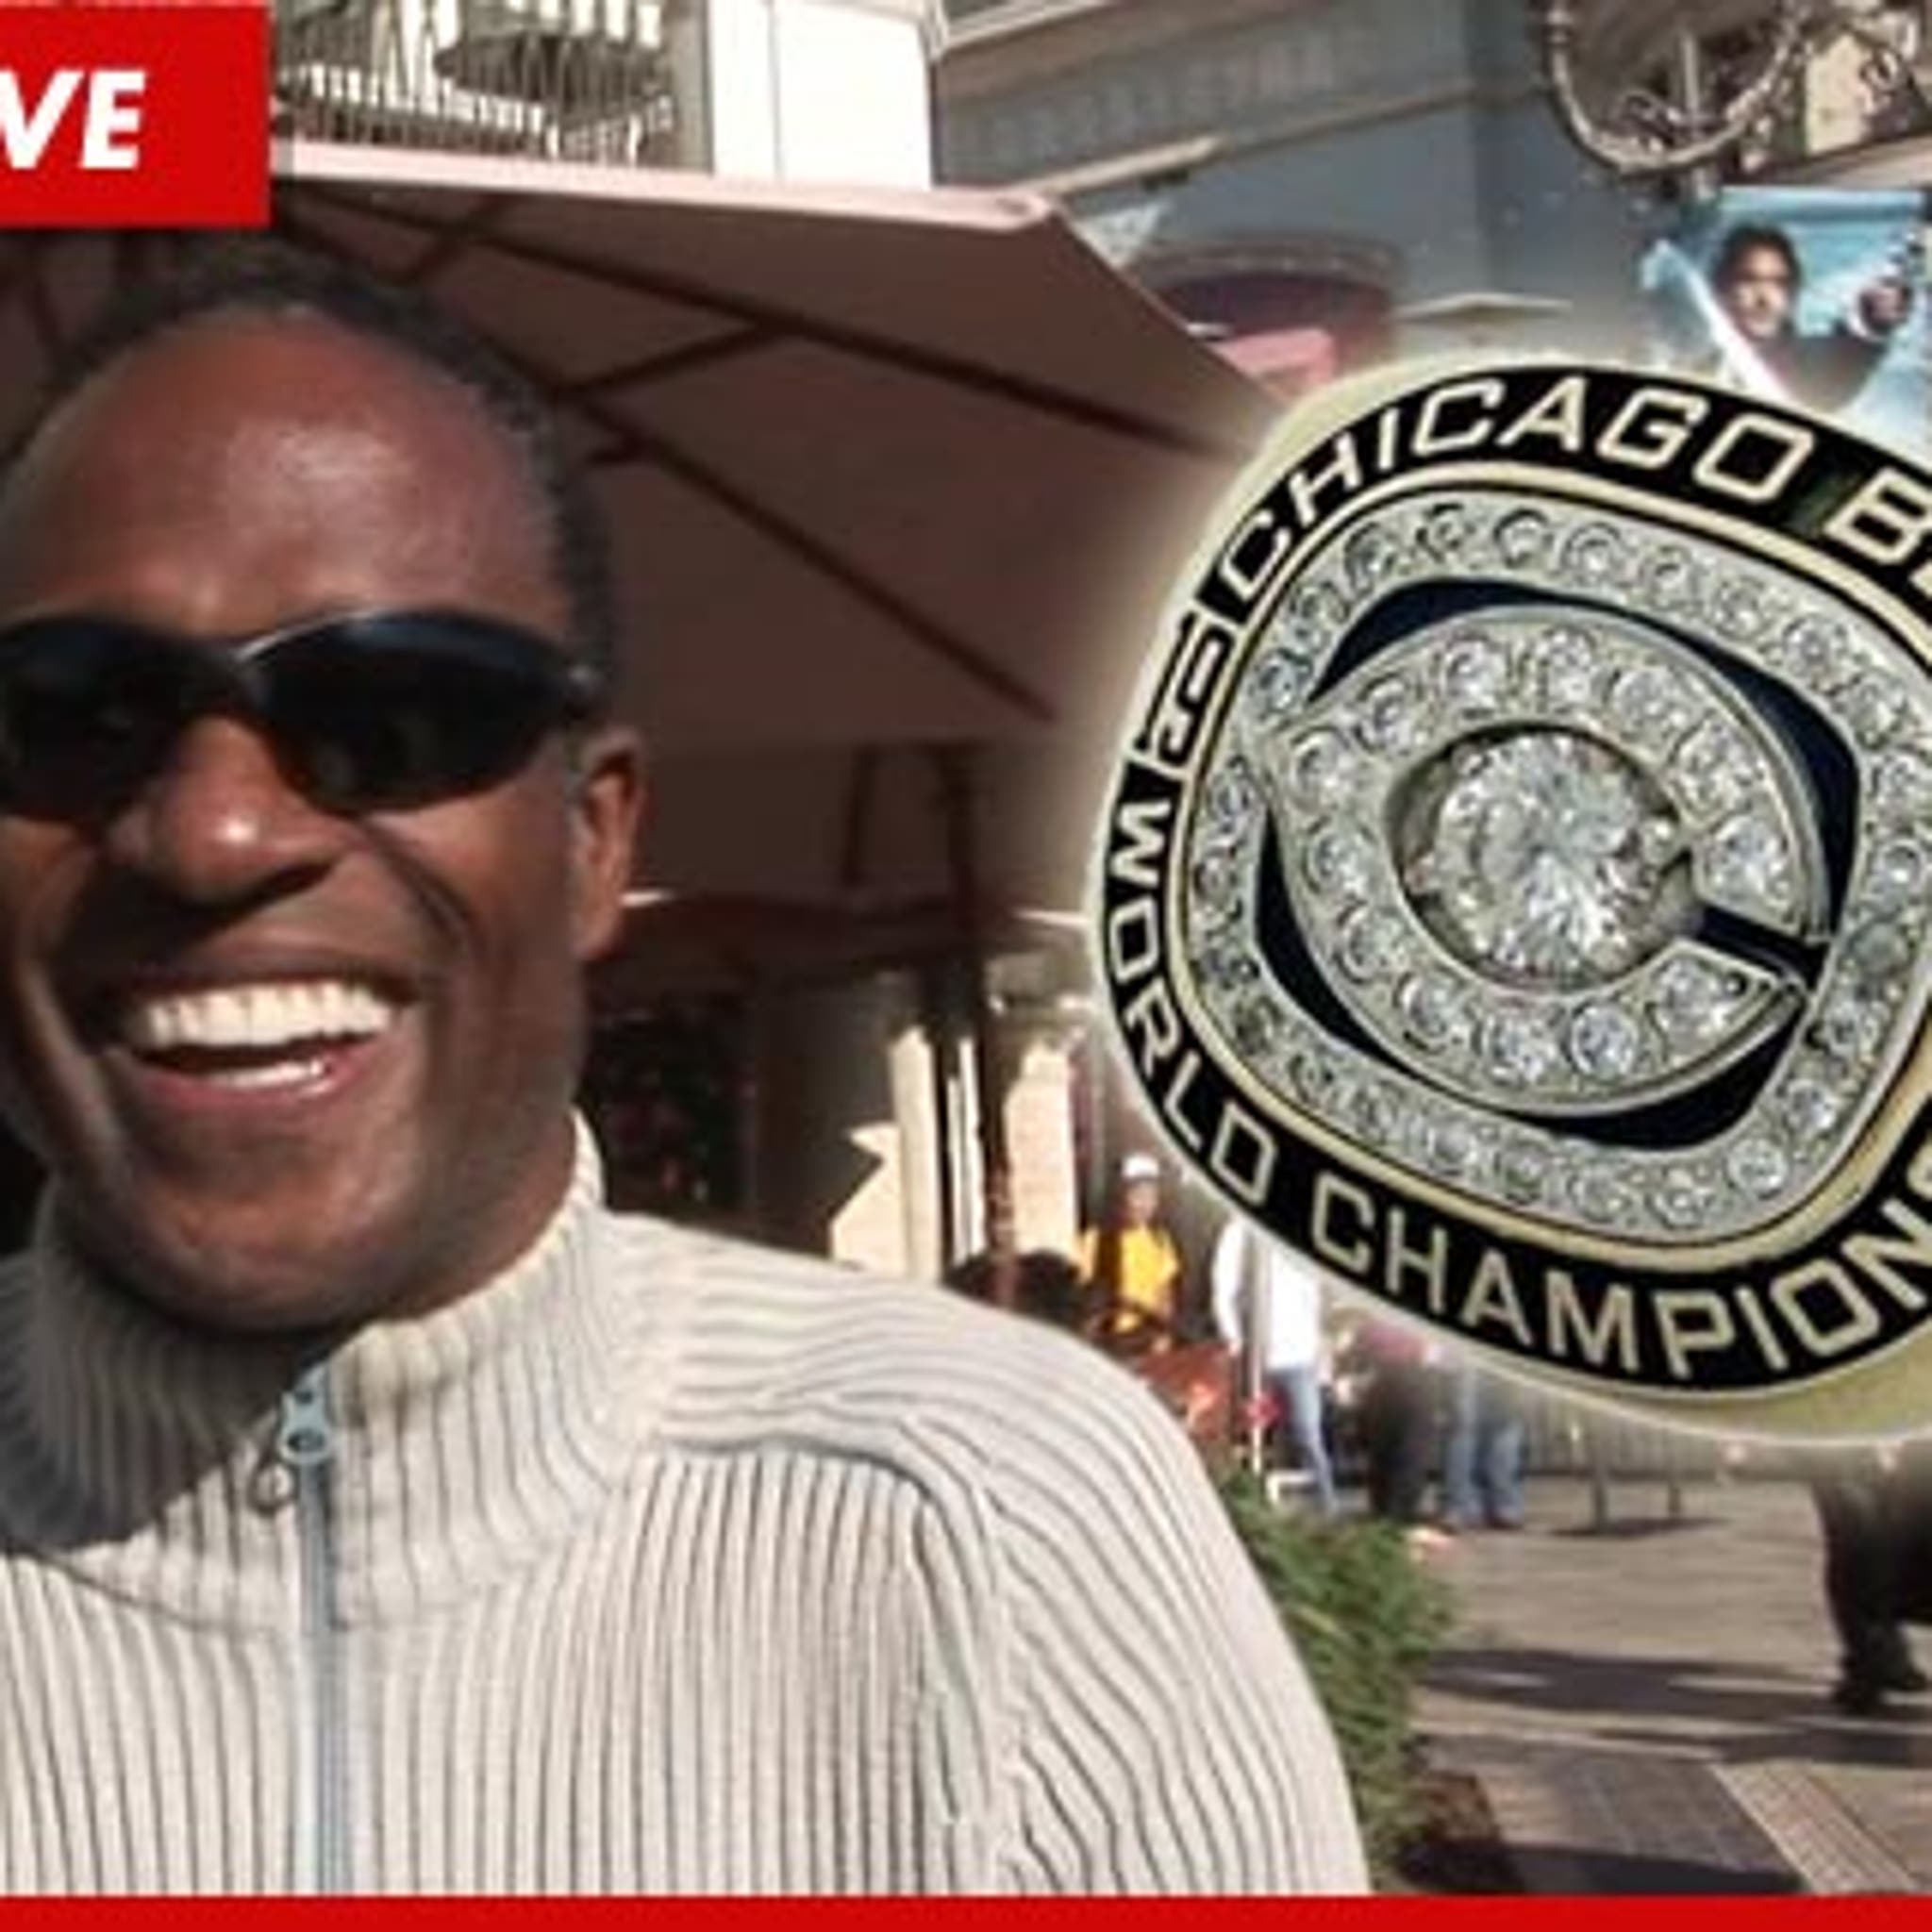 Willie Gault: Robbers of Super Bowl Ring Are Villains of Highest